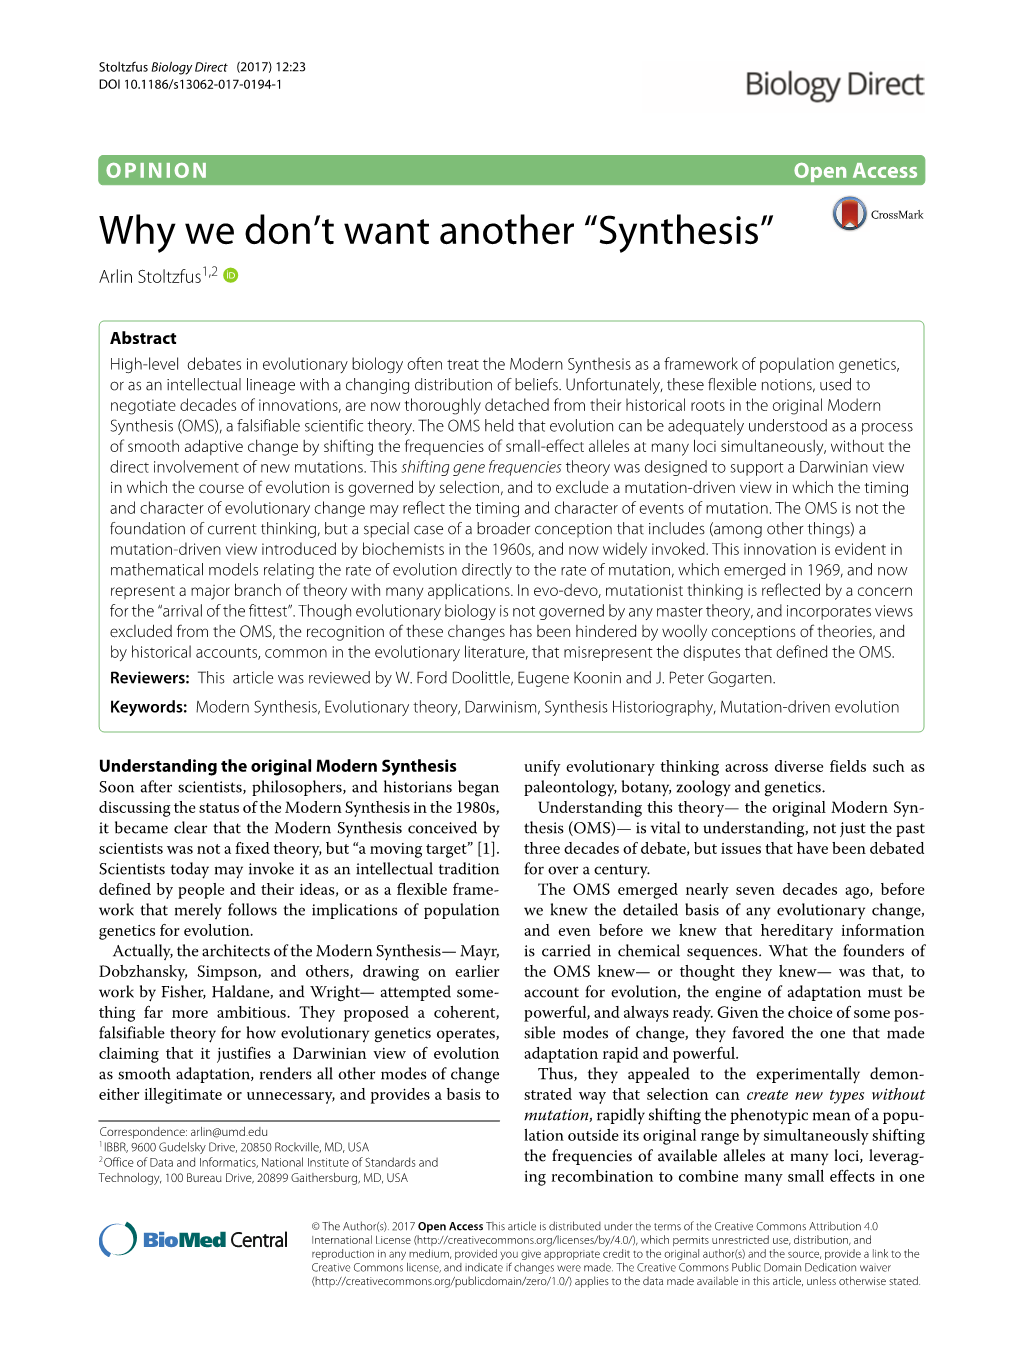 Why We Don't Want Another "Synthesis"